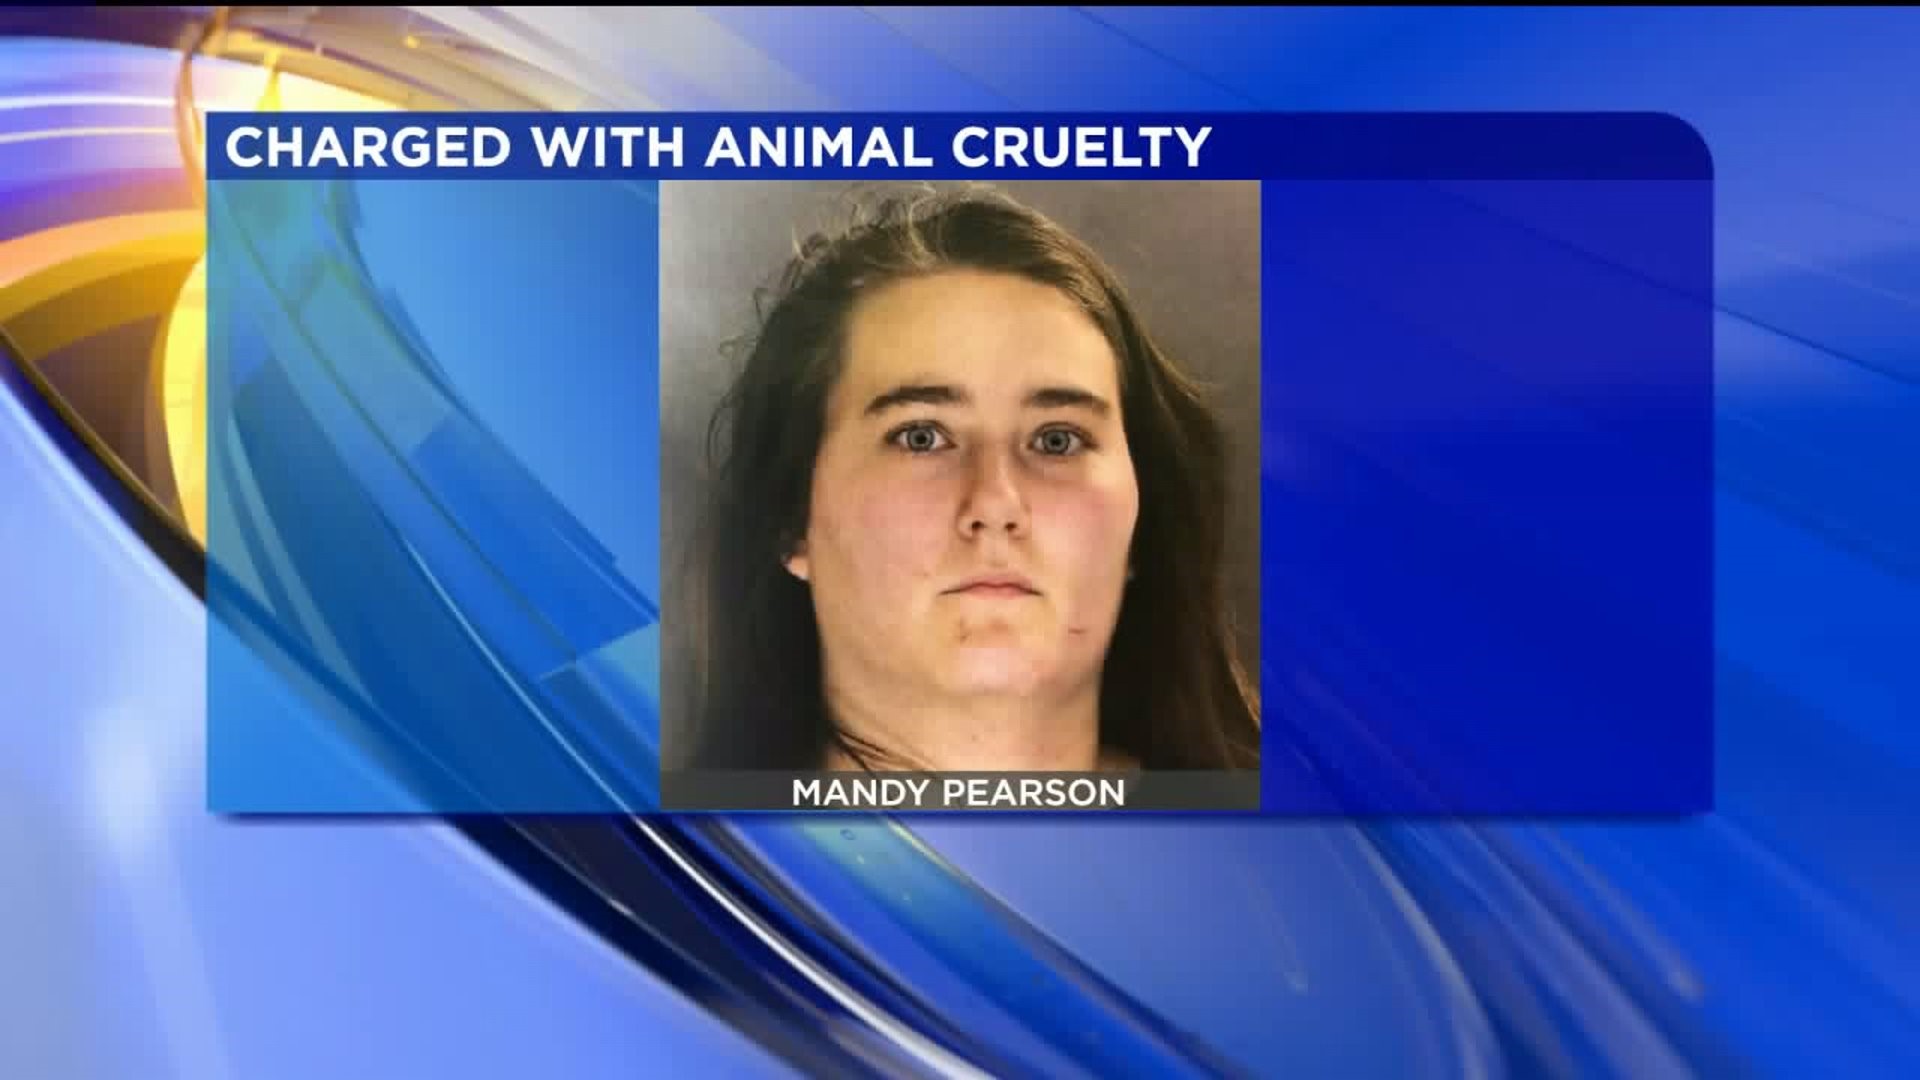 Starving Dogs Discovered, Owner Charged With Animal Cruelty